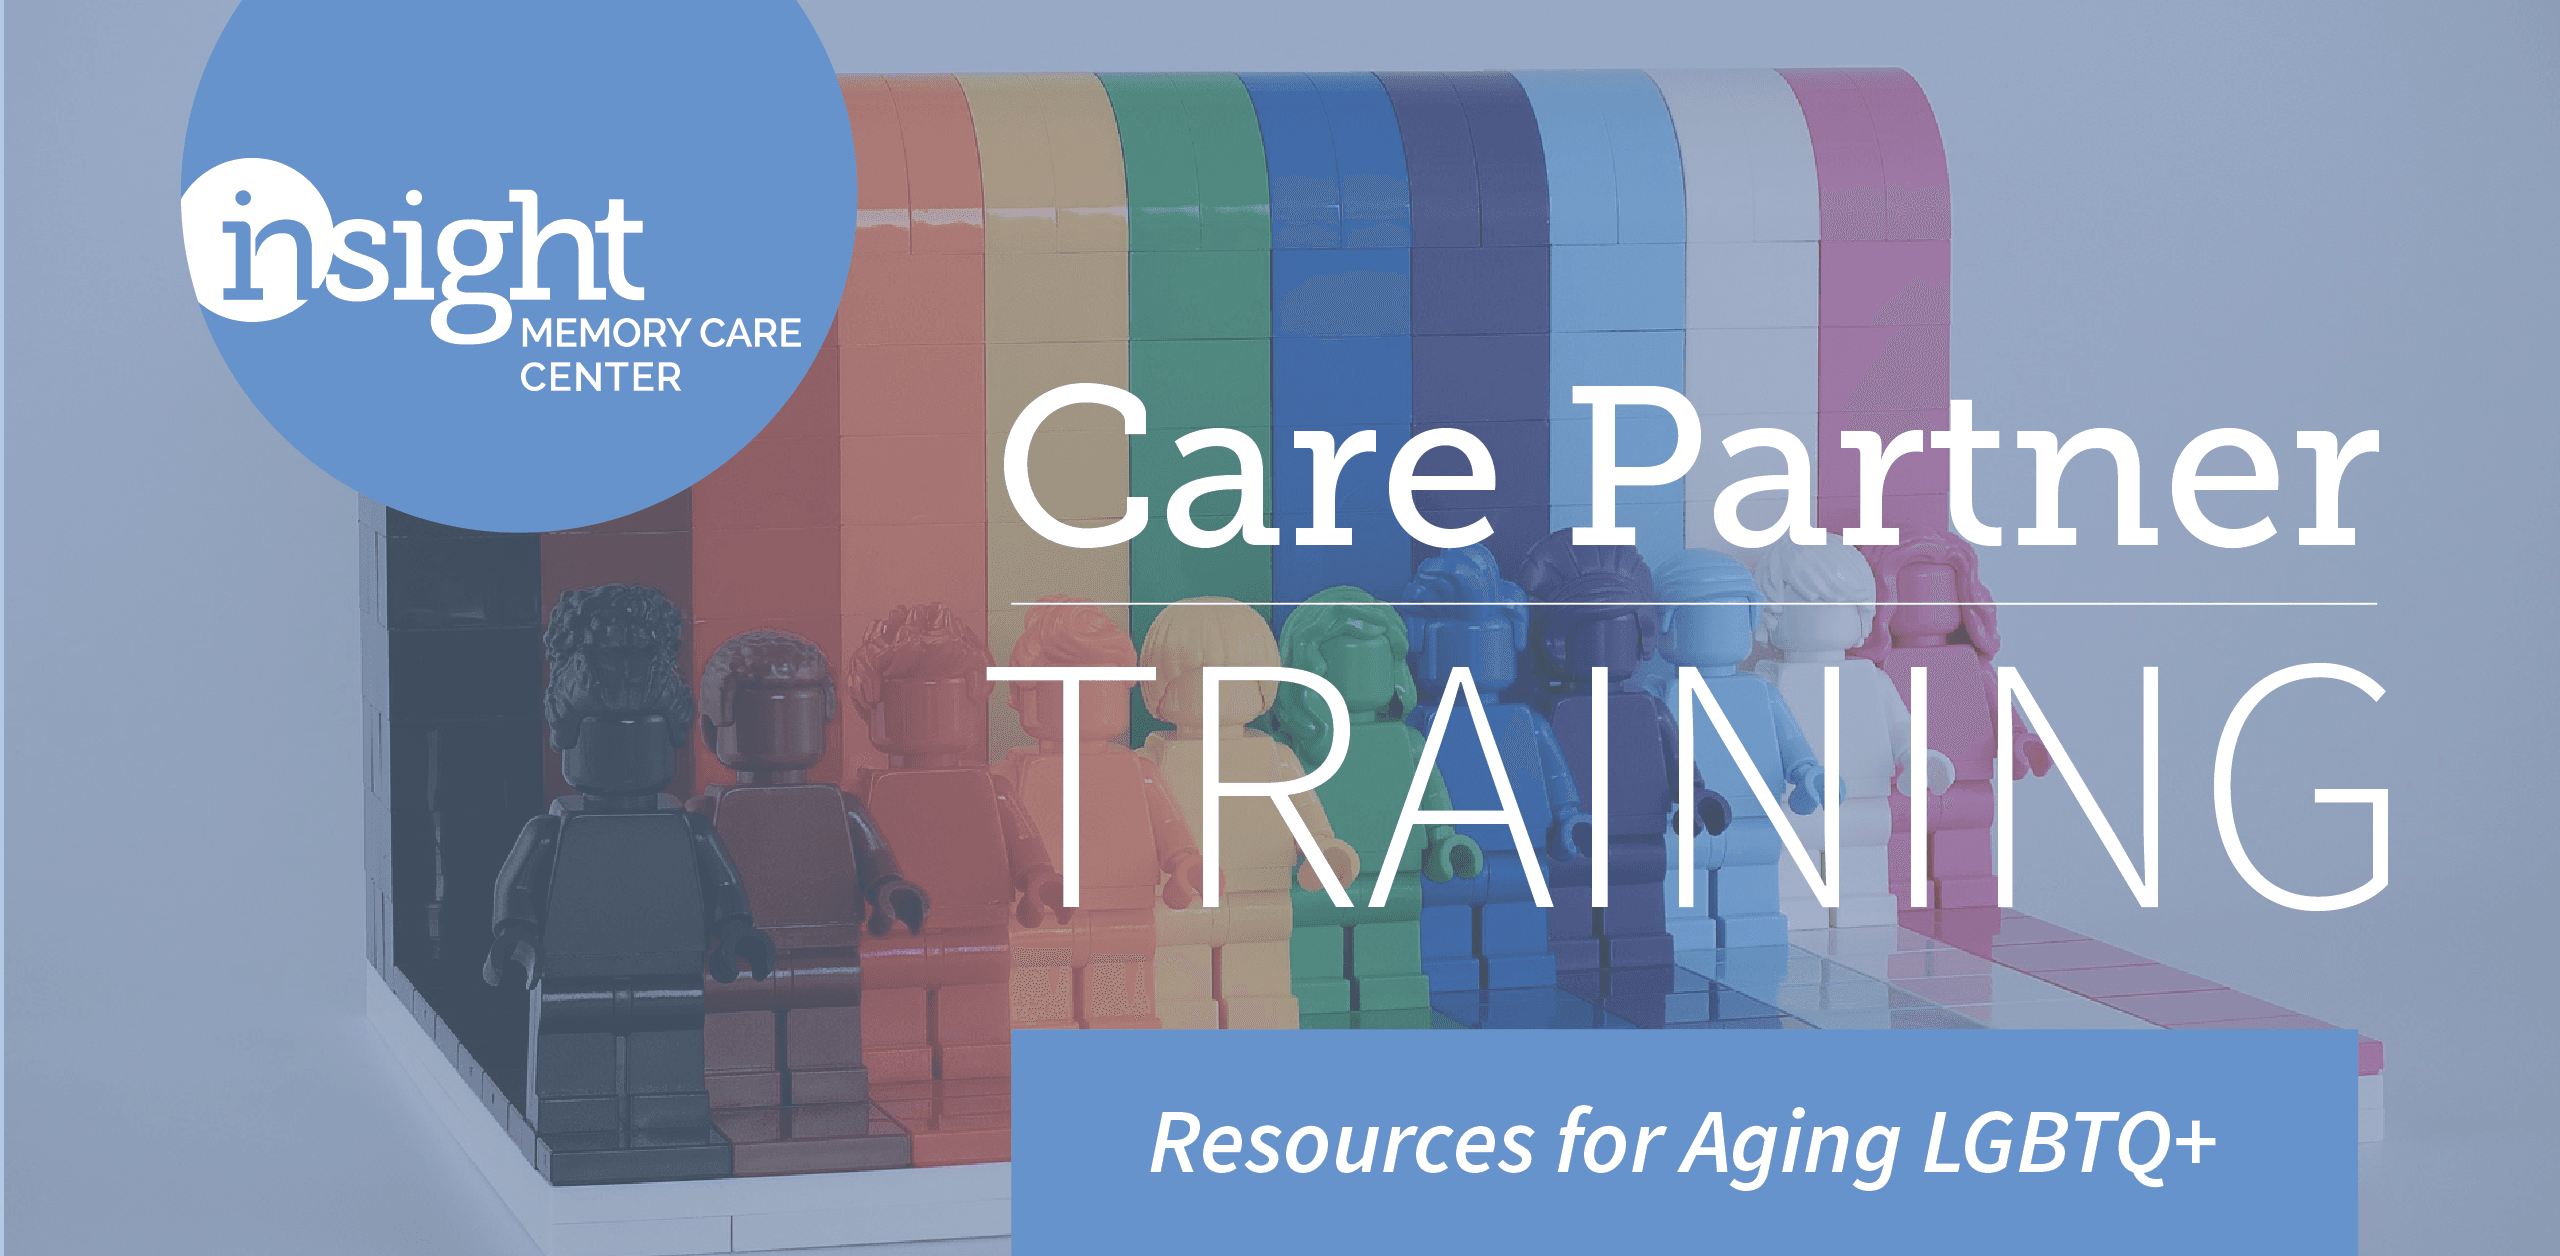 Resources for Aging LGBTQ+: Cultural Awareness and Sensitivity with Older Adults